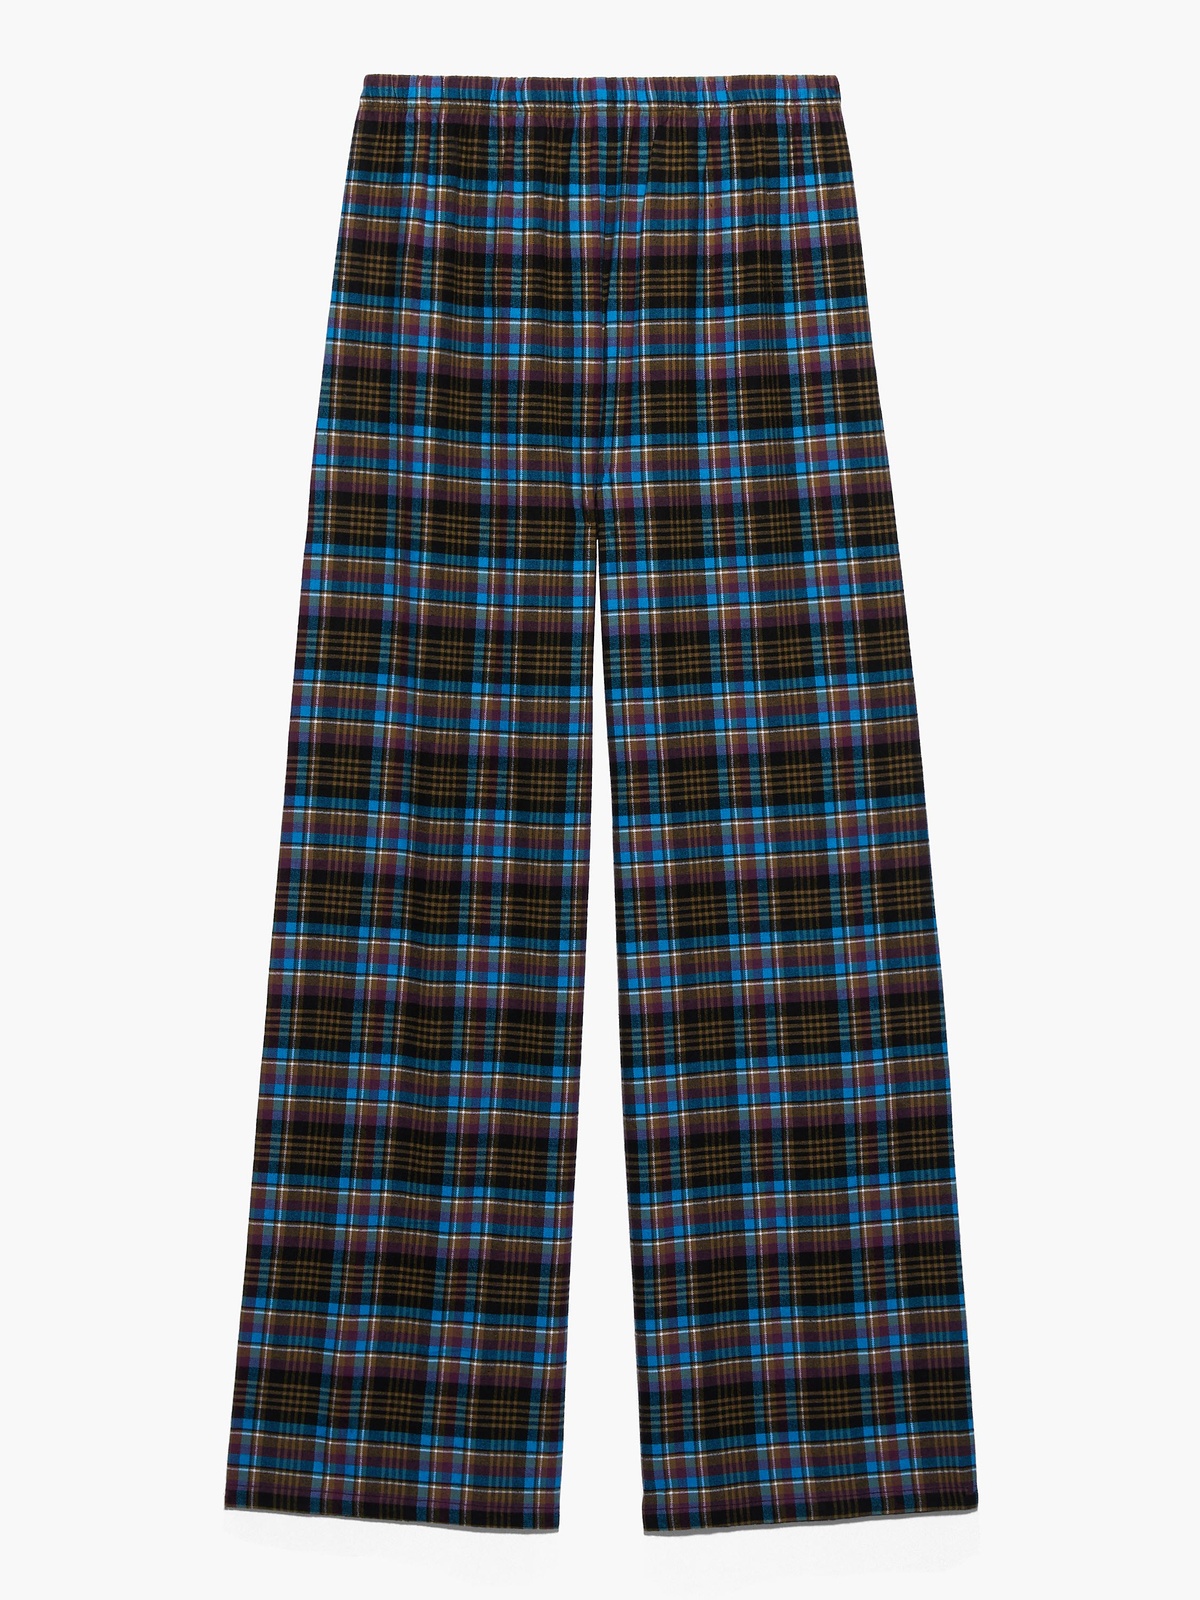 Rihanna Cotton And Flannel lace-up plaid open-back pajama pants on sale 4